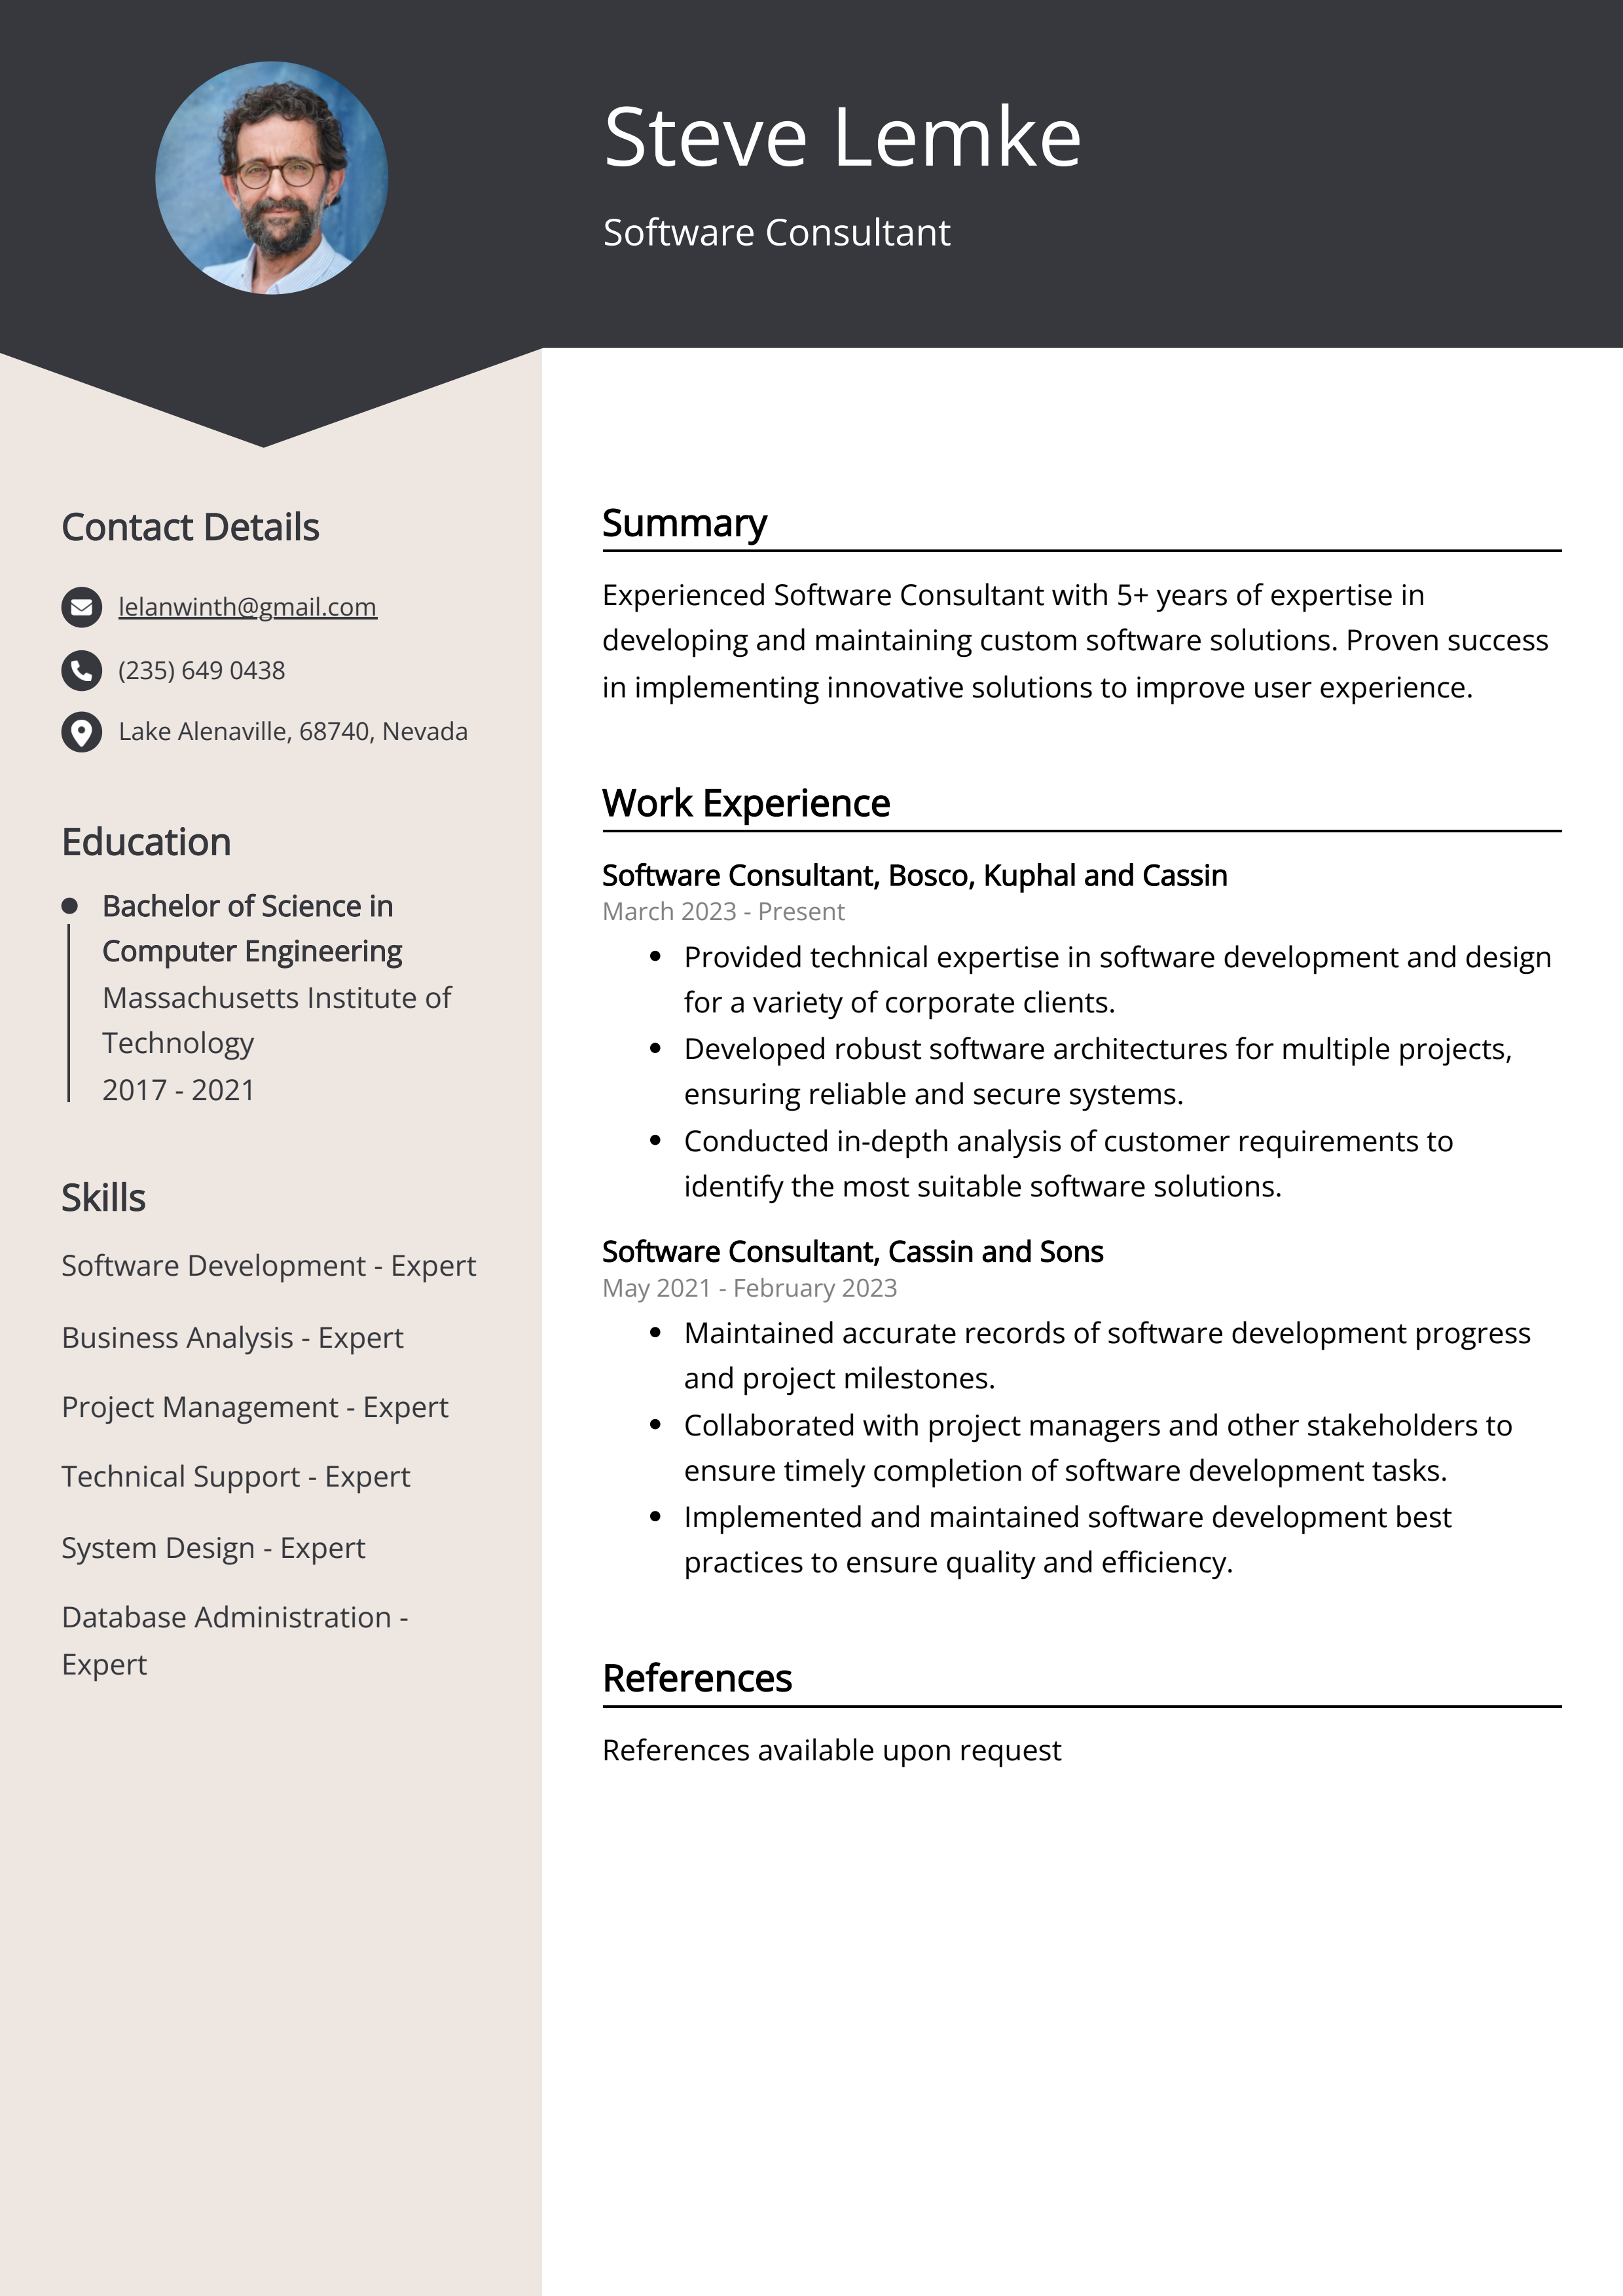 Software Consultant CV Example